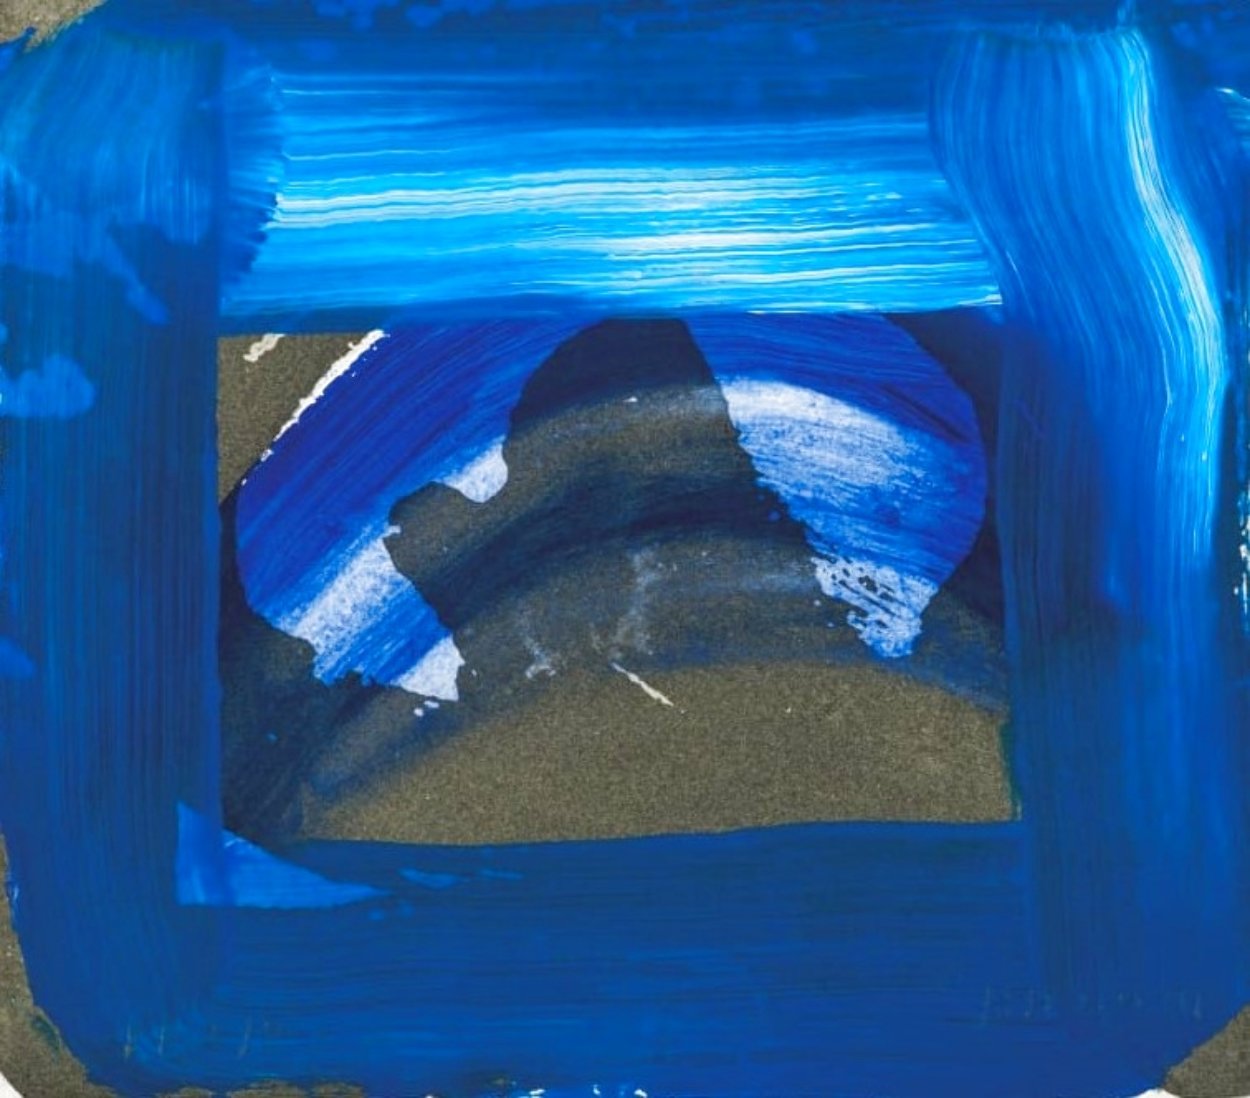 Sea PP 2002 Limited Edition Print by Howard Hodgkin